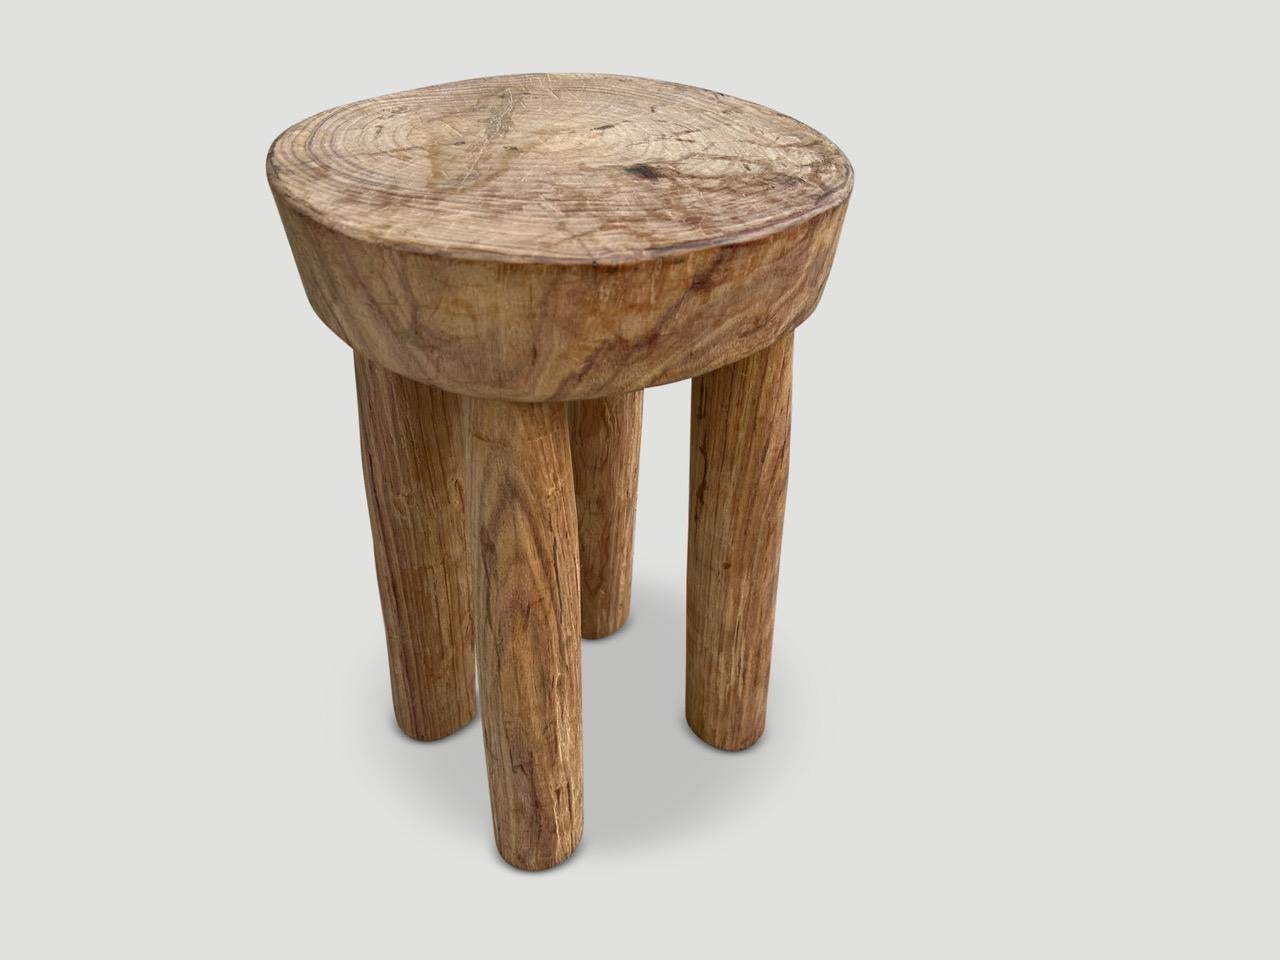 Beautiful antique side table or stool hand carved by the Senufo tribes from a single block of mahogany wood native to the west coast of Africa. The wood is tough, dense and very durable. The light tone wood on this one is unusual as they are mostly